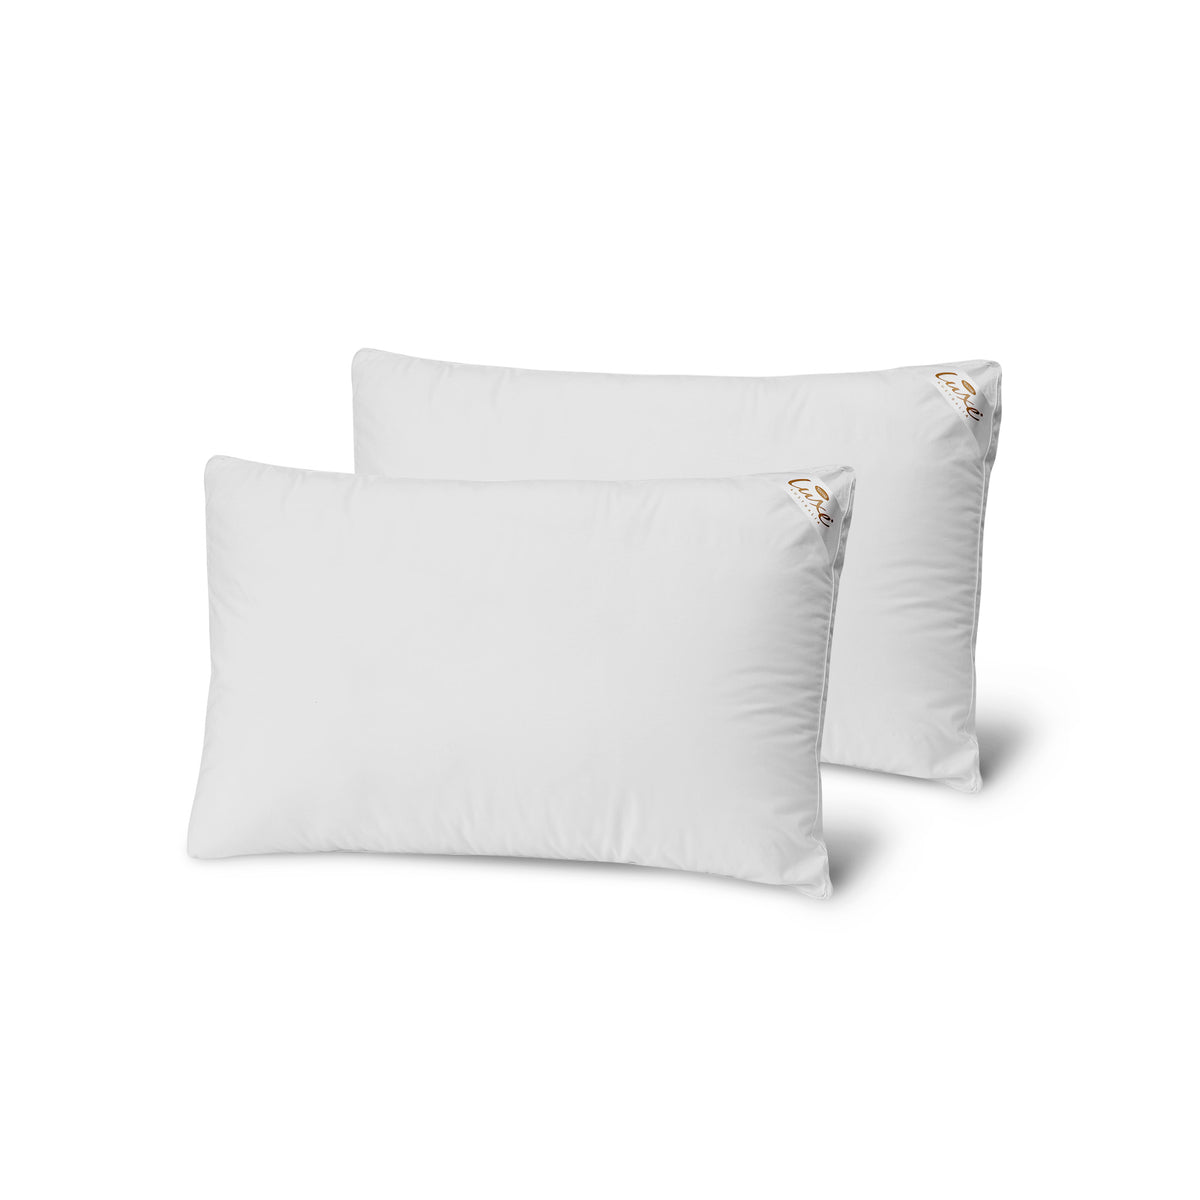 Luxe Superior Support Twin Pack Pillows